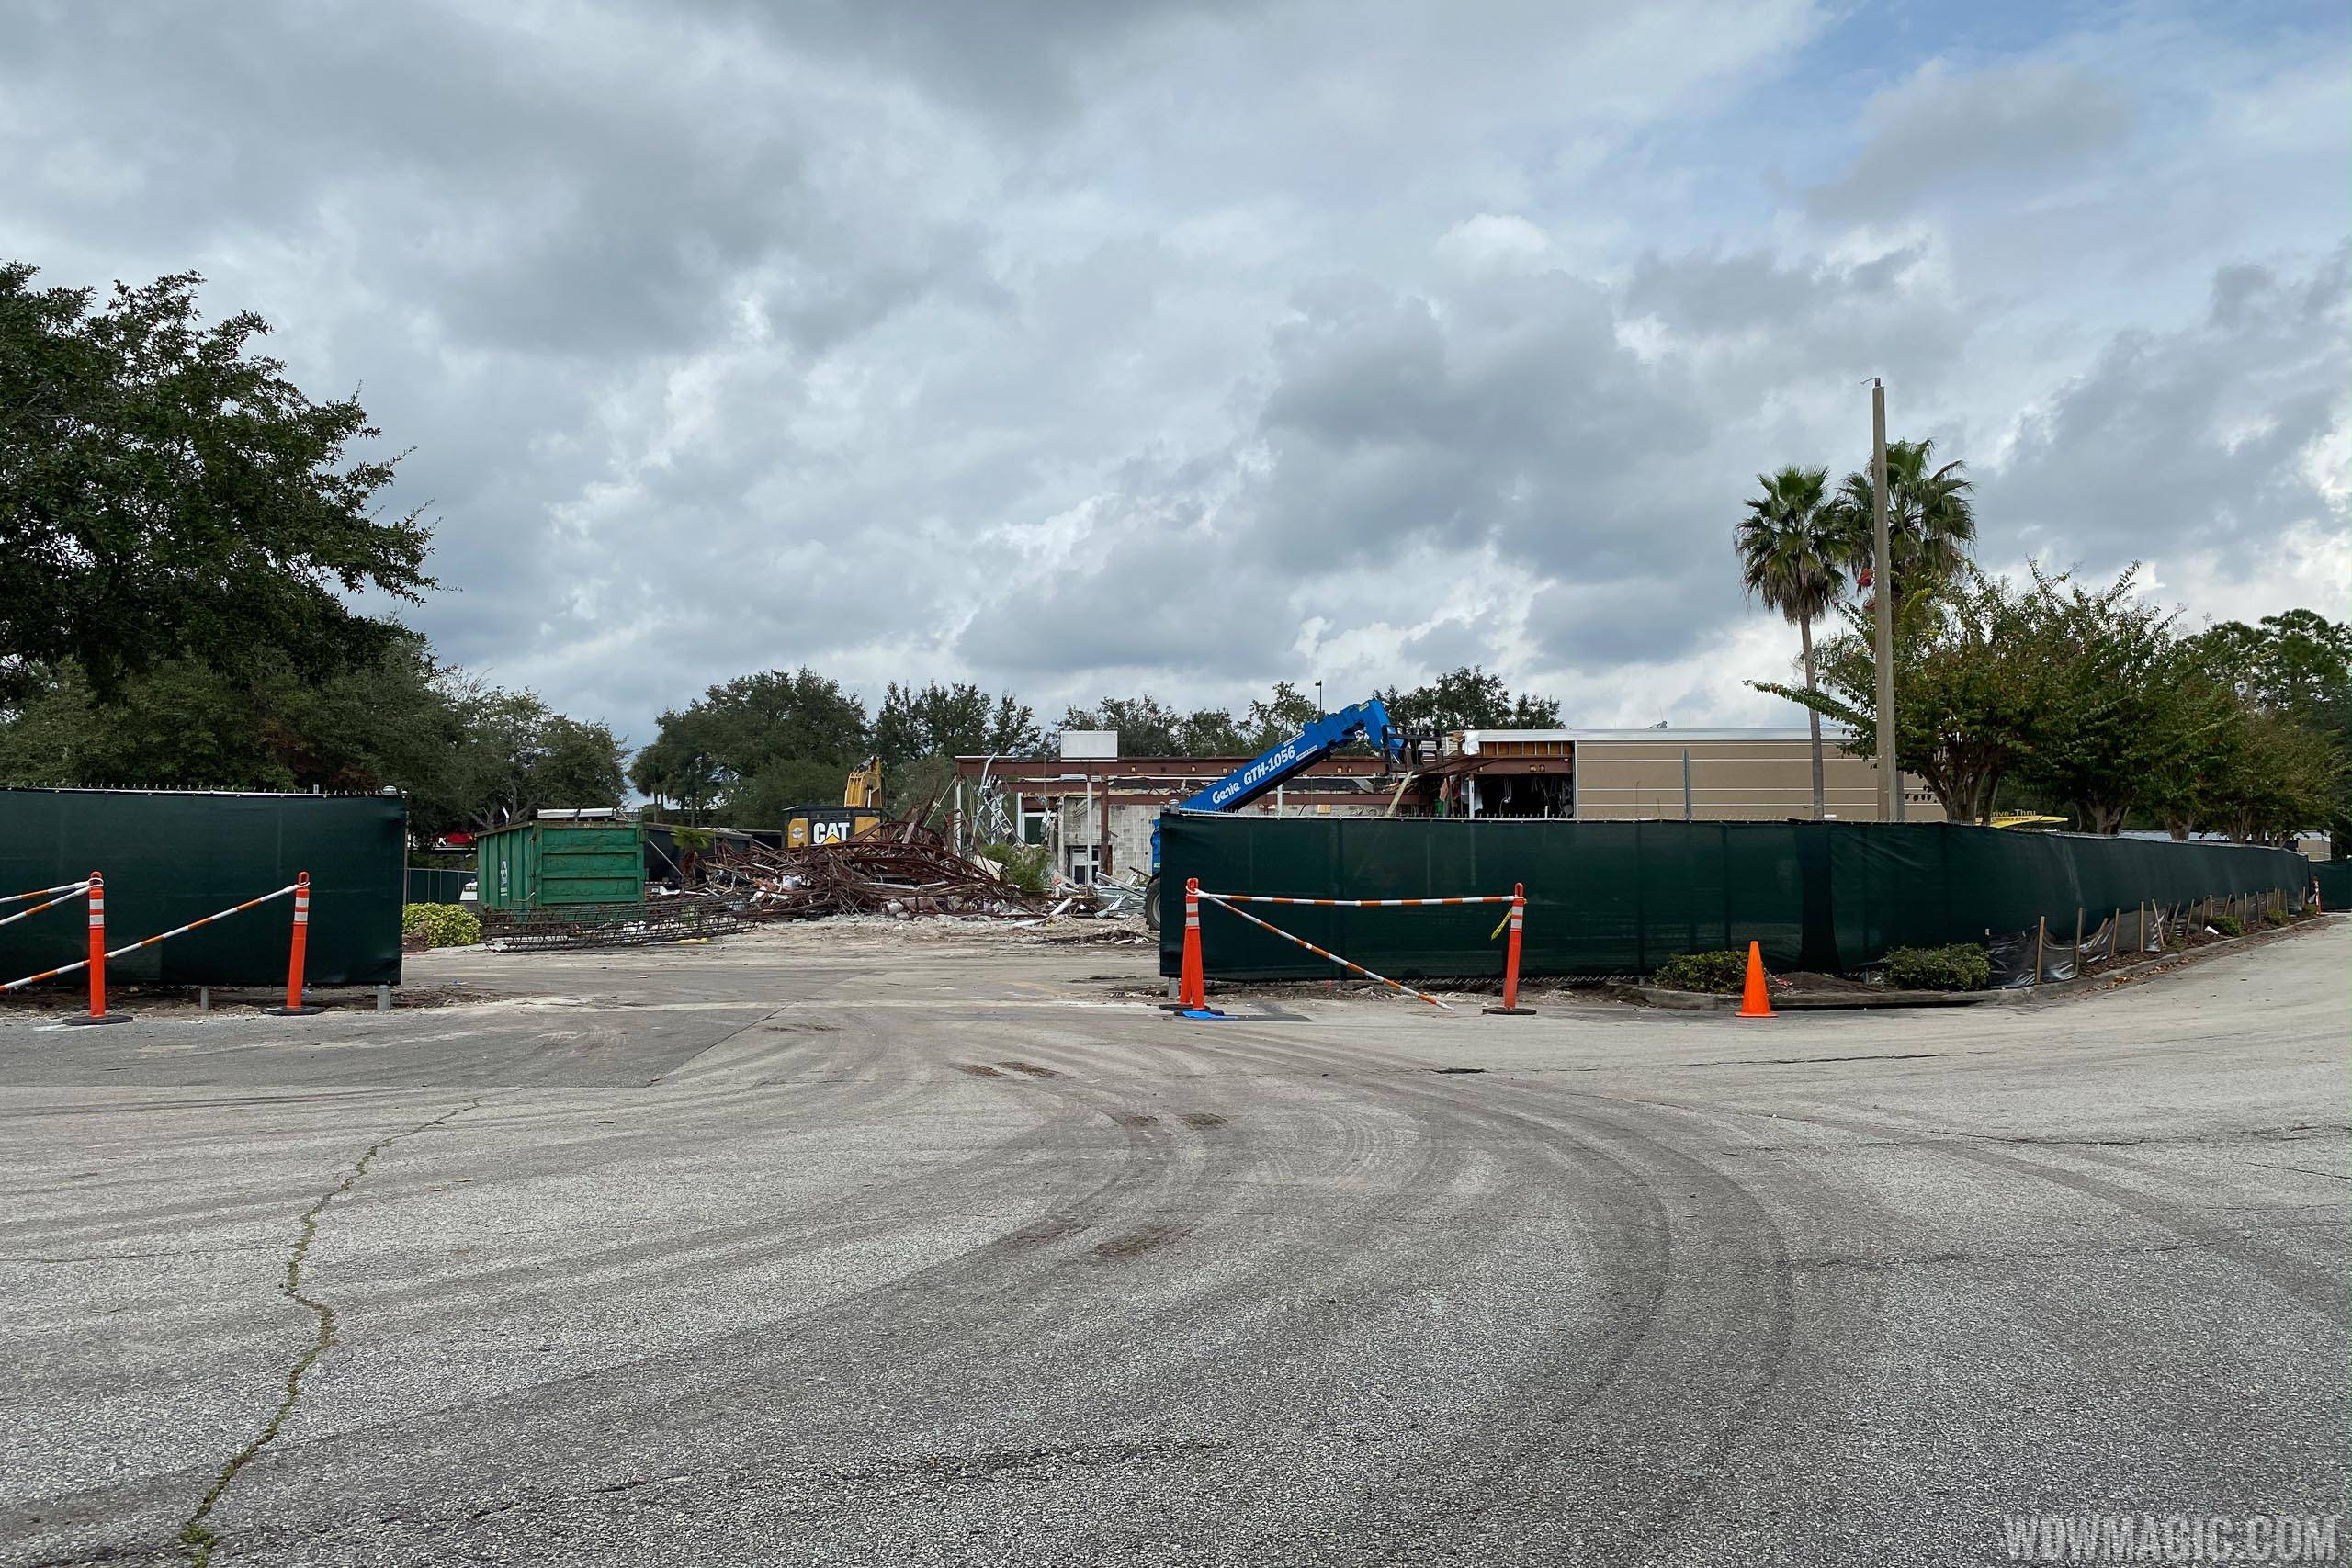 McDonald's at the All Star Resorts area demolition